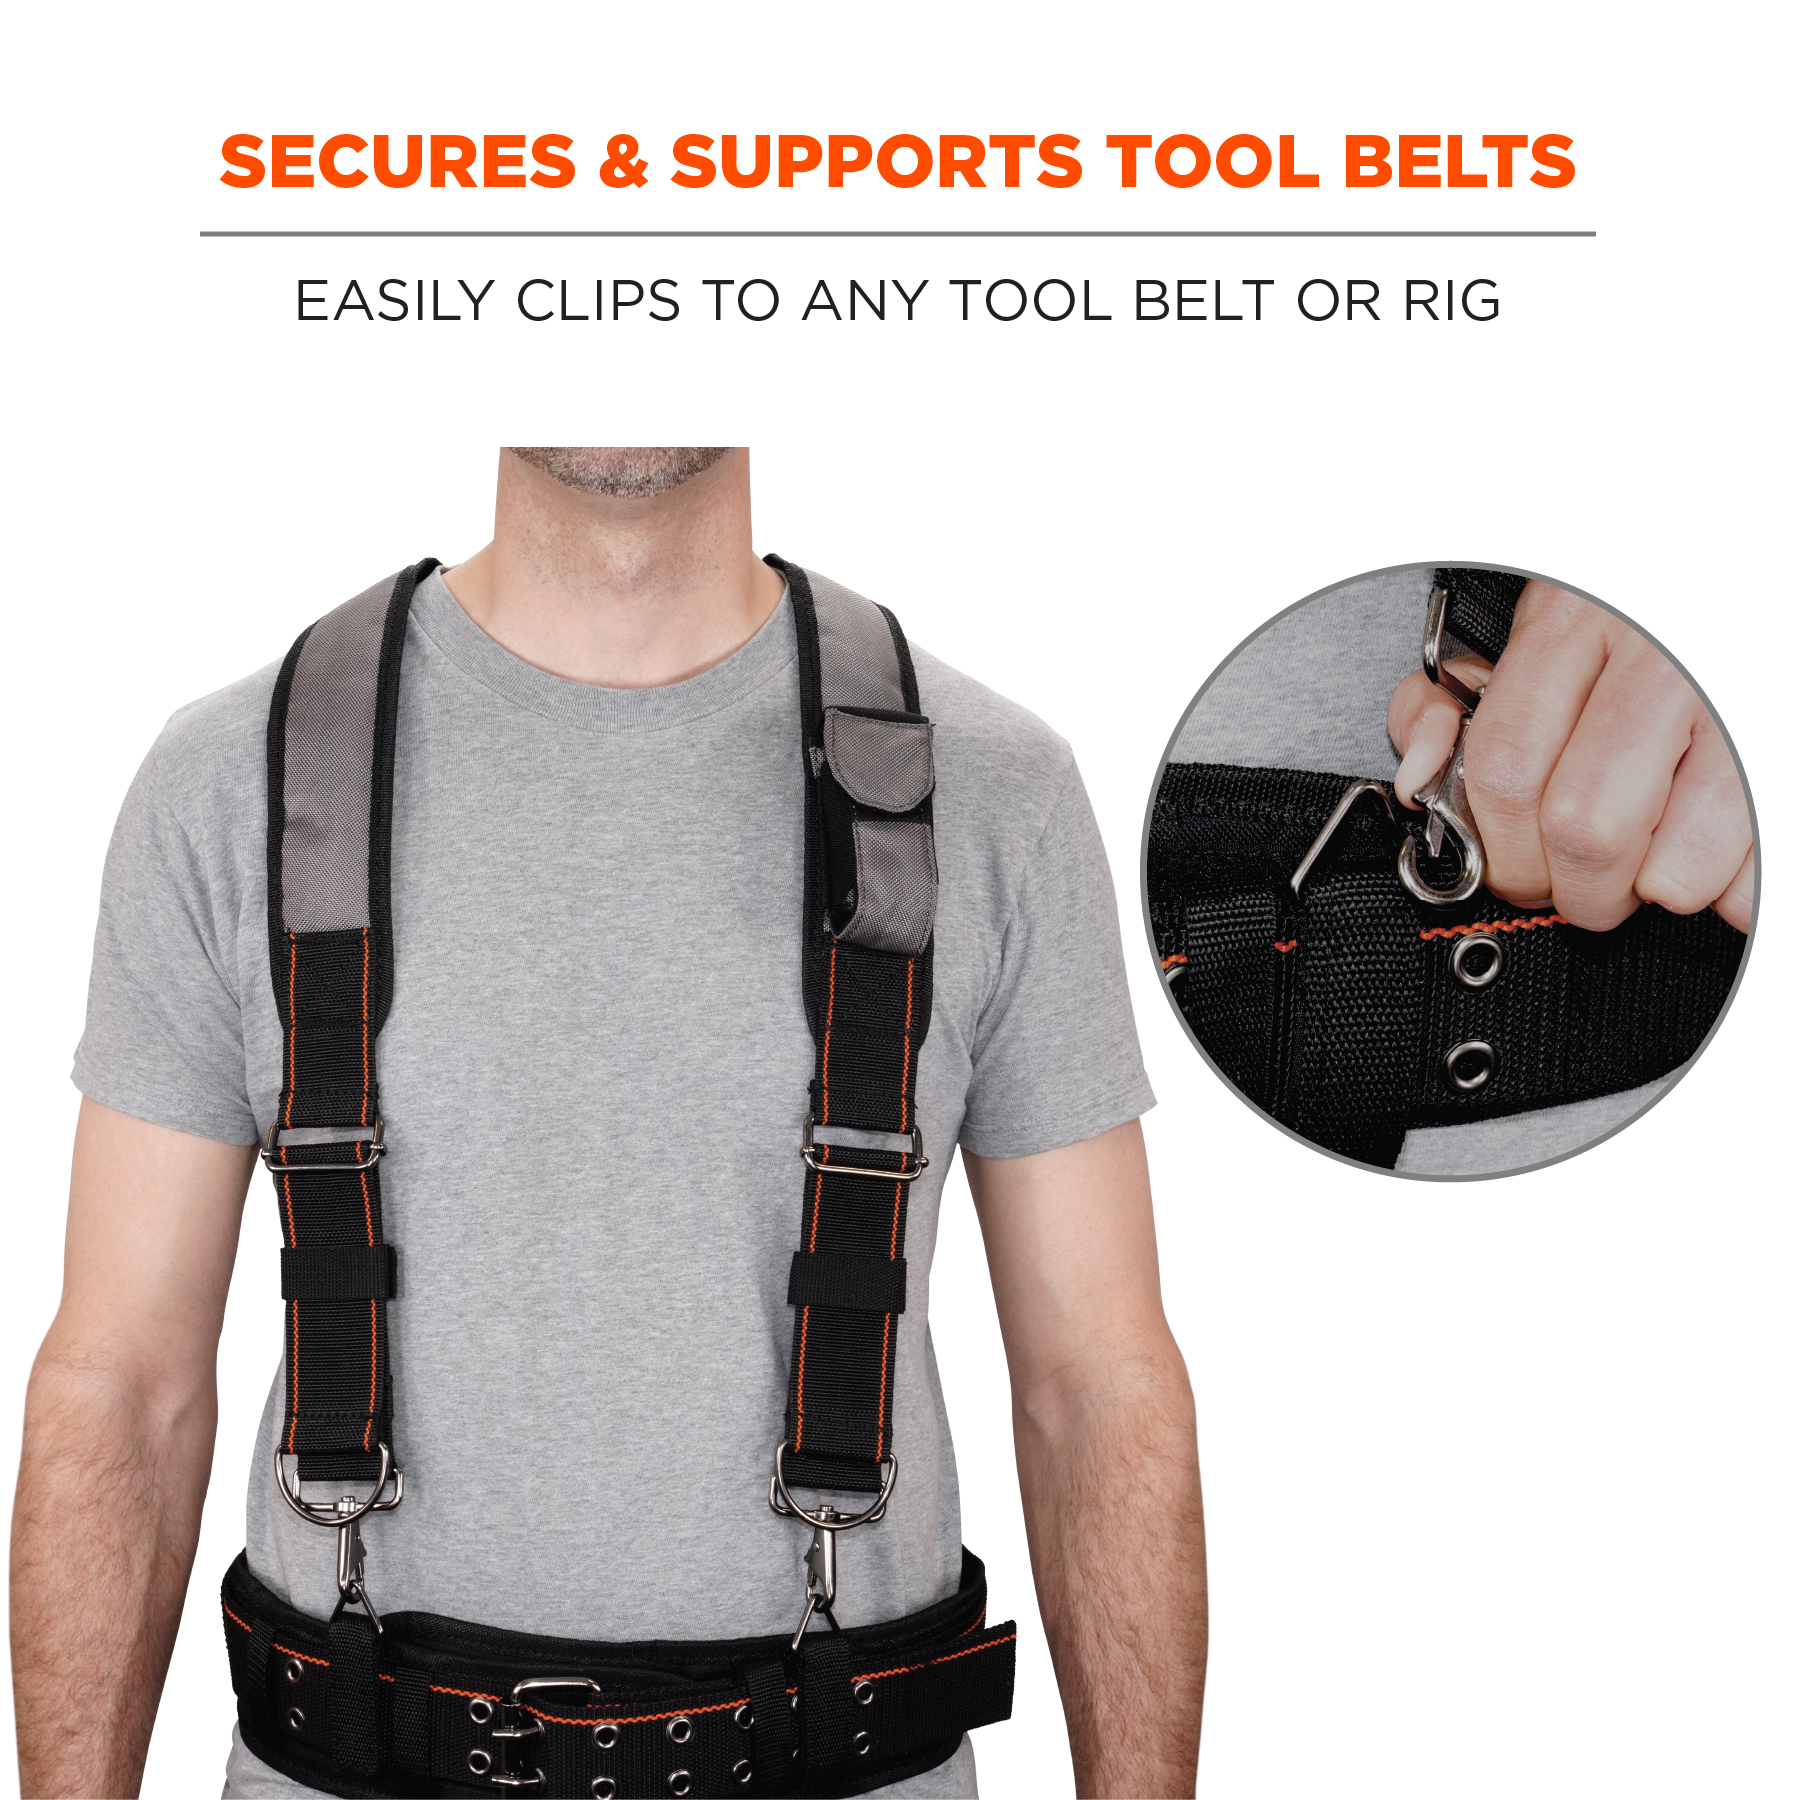 https://www.ergodyne.com/sites/default/files/product-images/13665-5560-tool-belt-suspenders-secures-and-supports-tool-belts.jpg